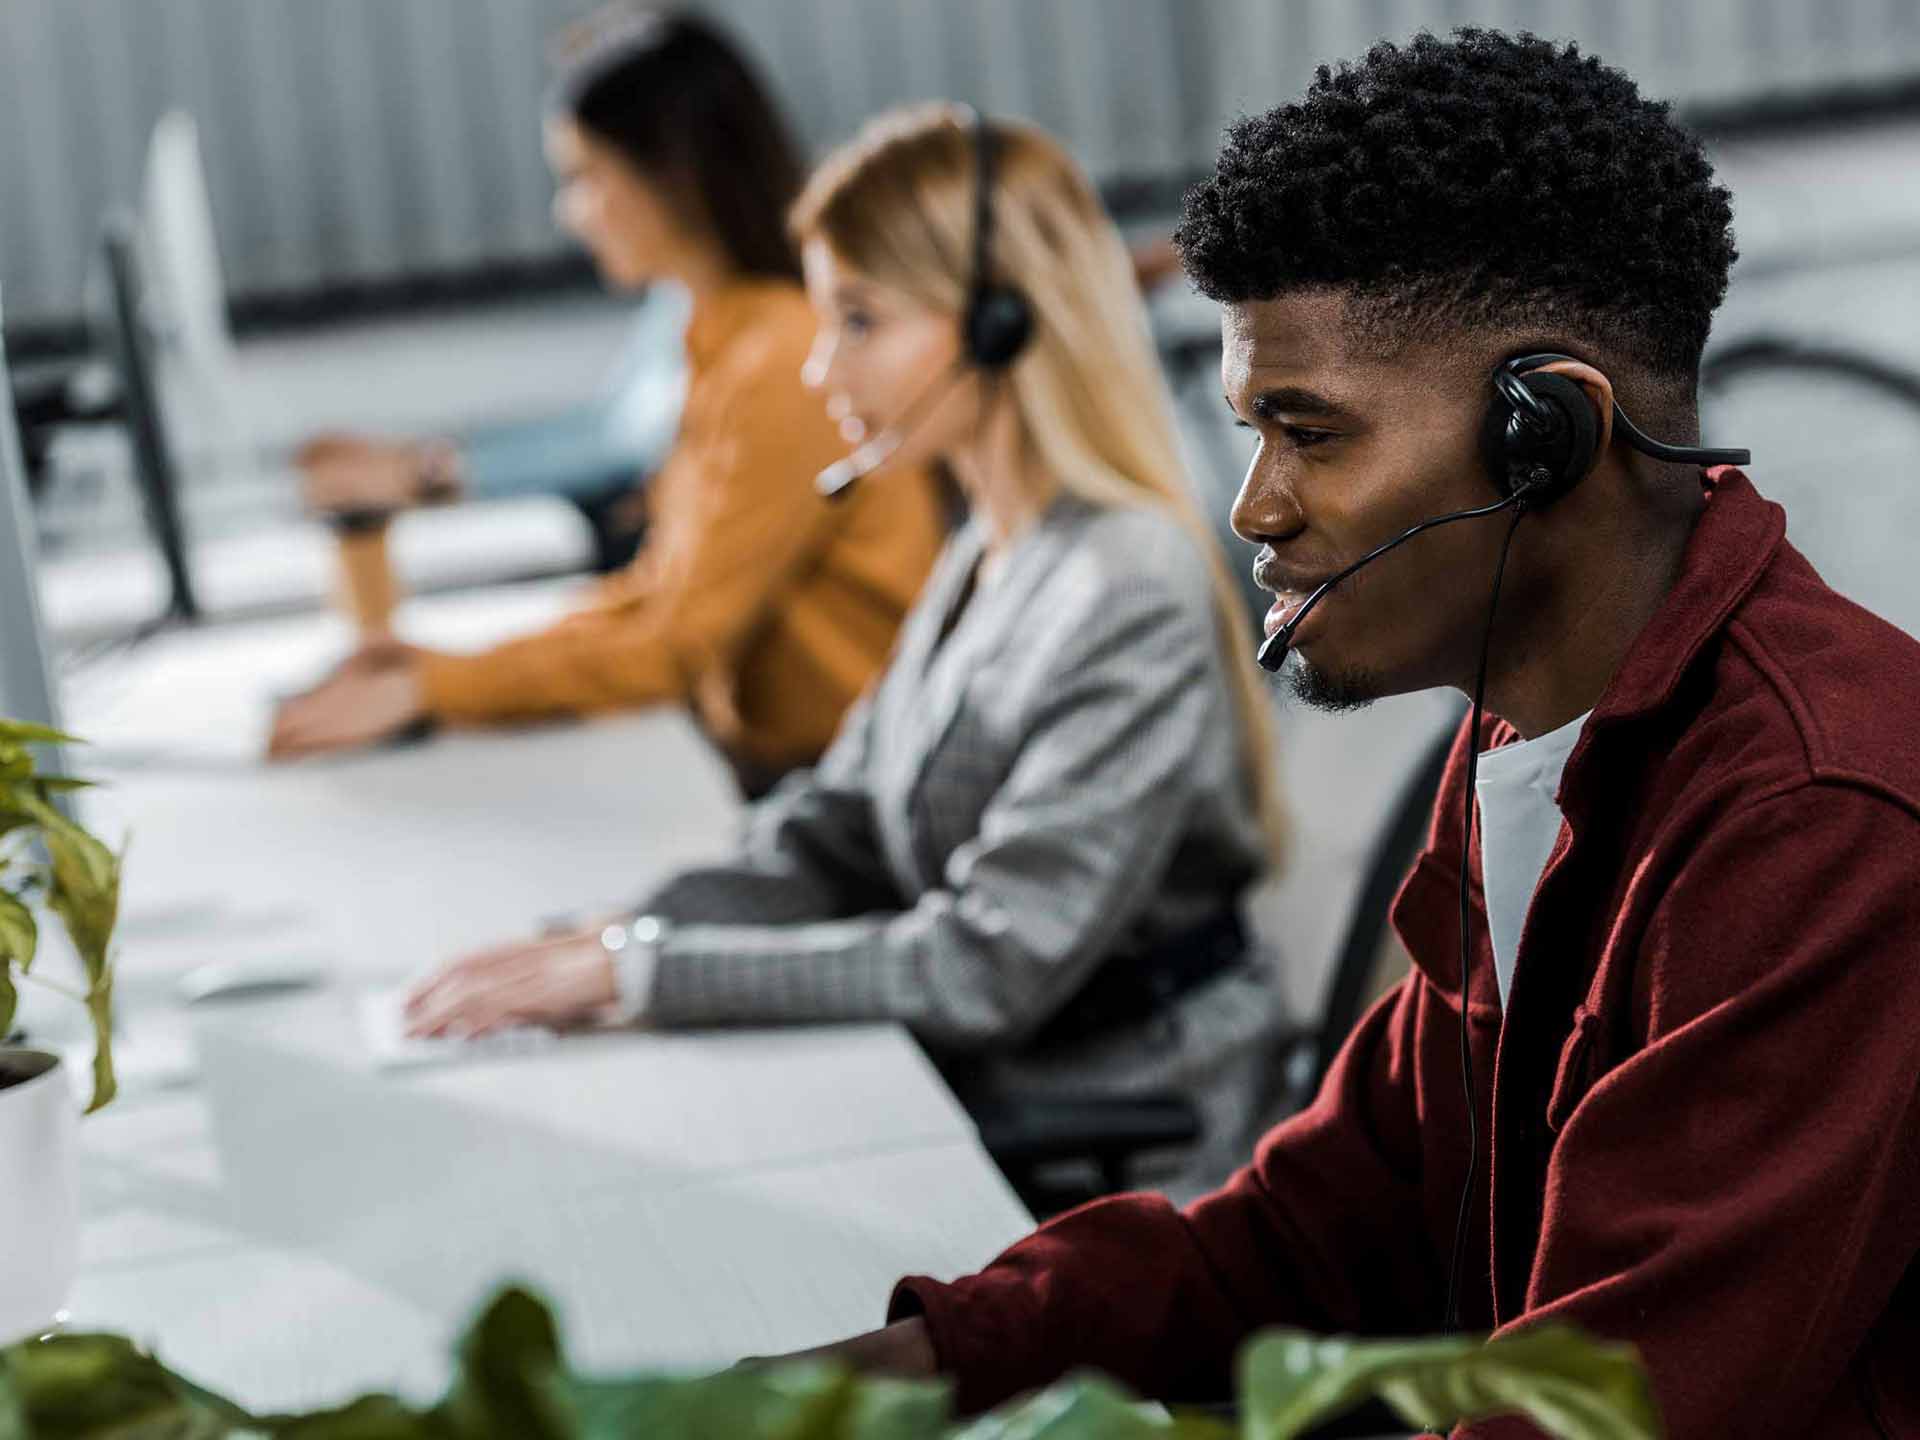 contact center agents wearing headsets